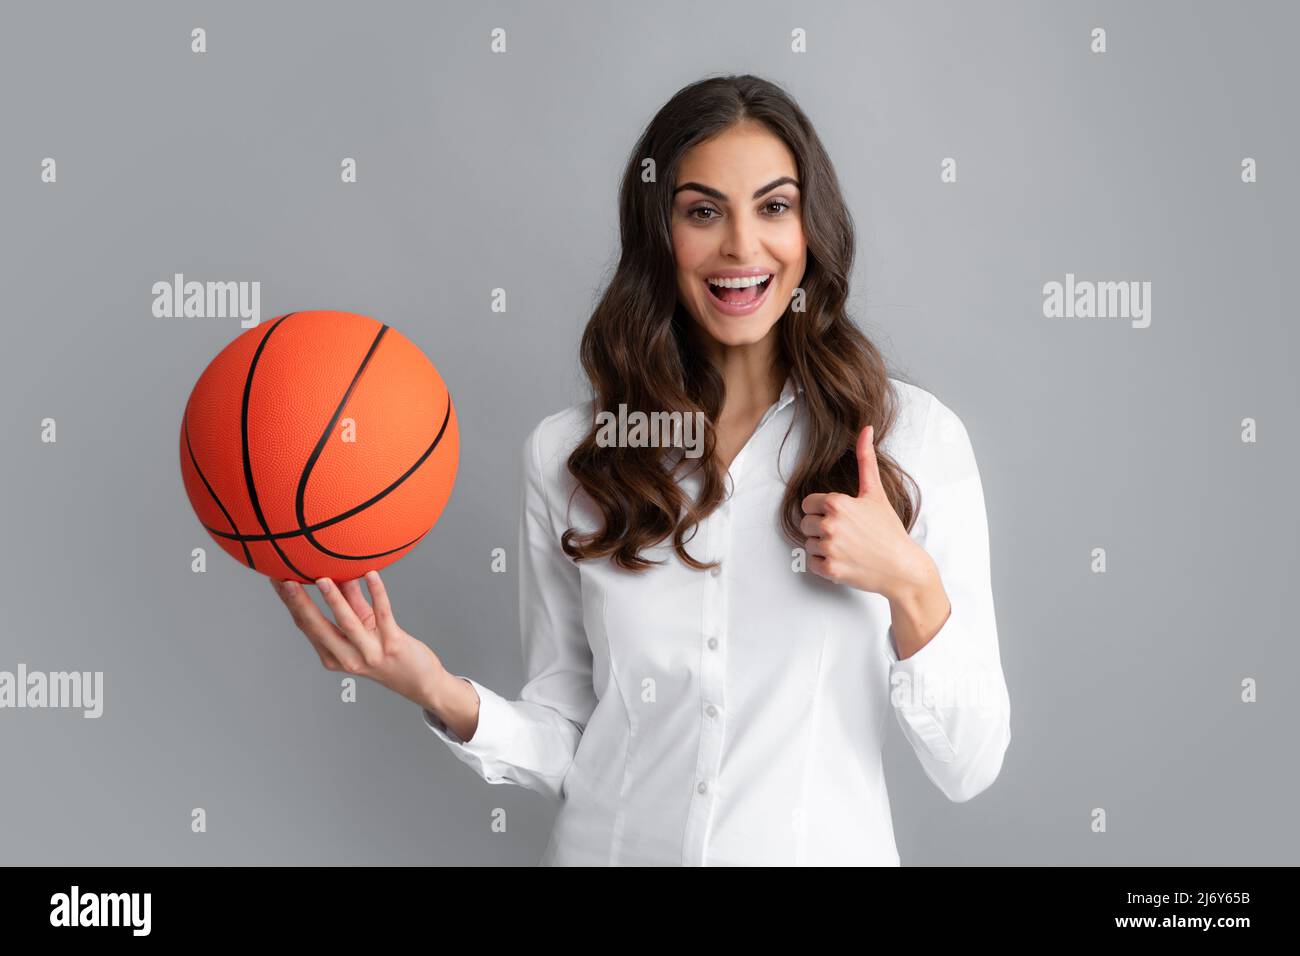 Happy woman with thumb up holding a basketball ball, isolated on gray background. Stock Photo